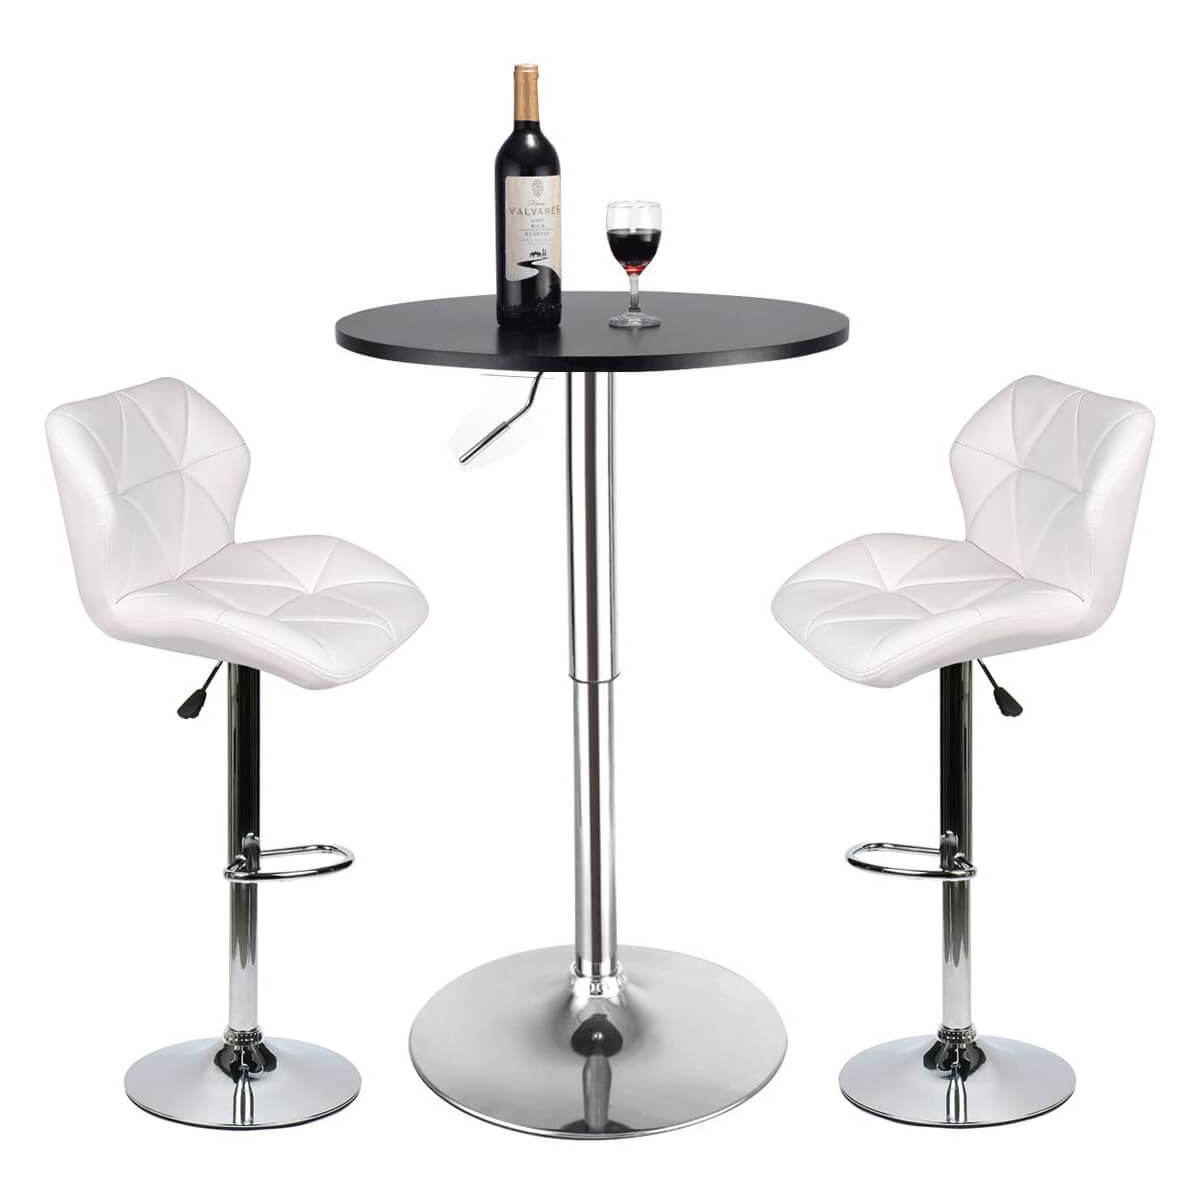 Elecwish Bar Table Set 3-Piece OW0301 black bar table with white bar stools